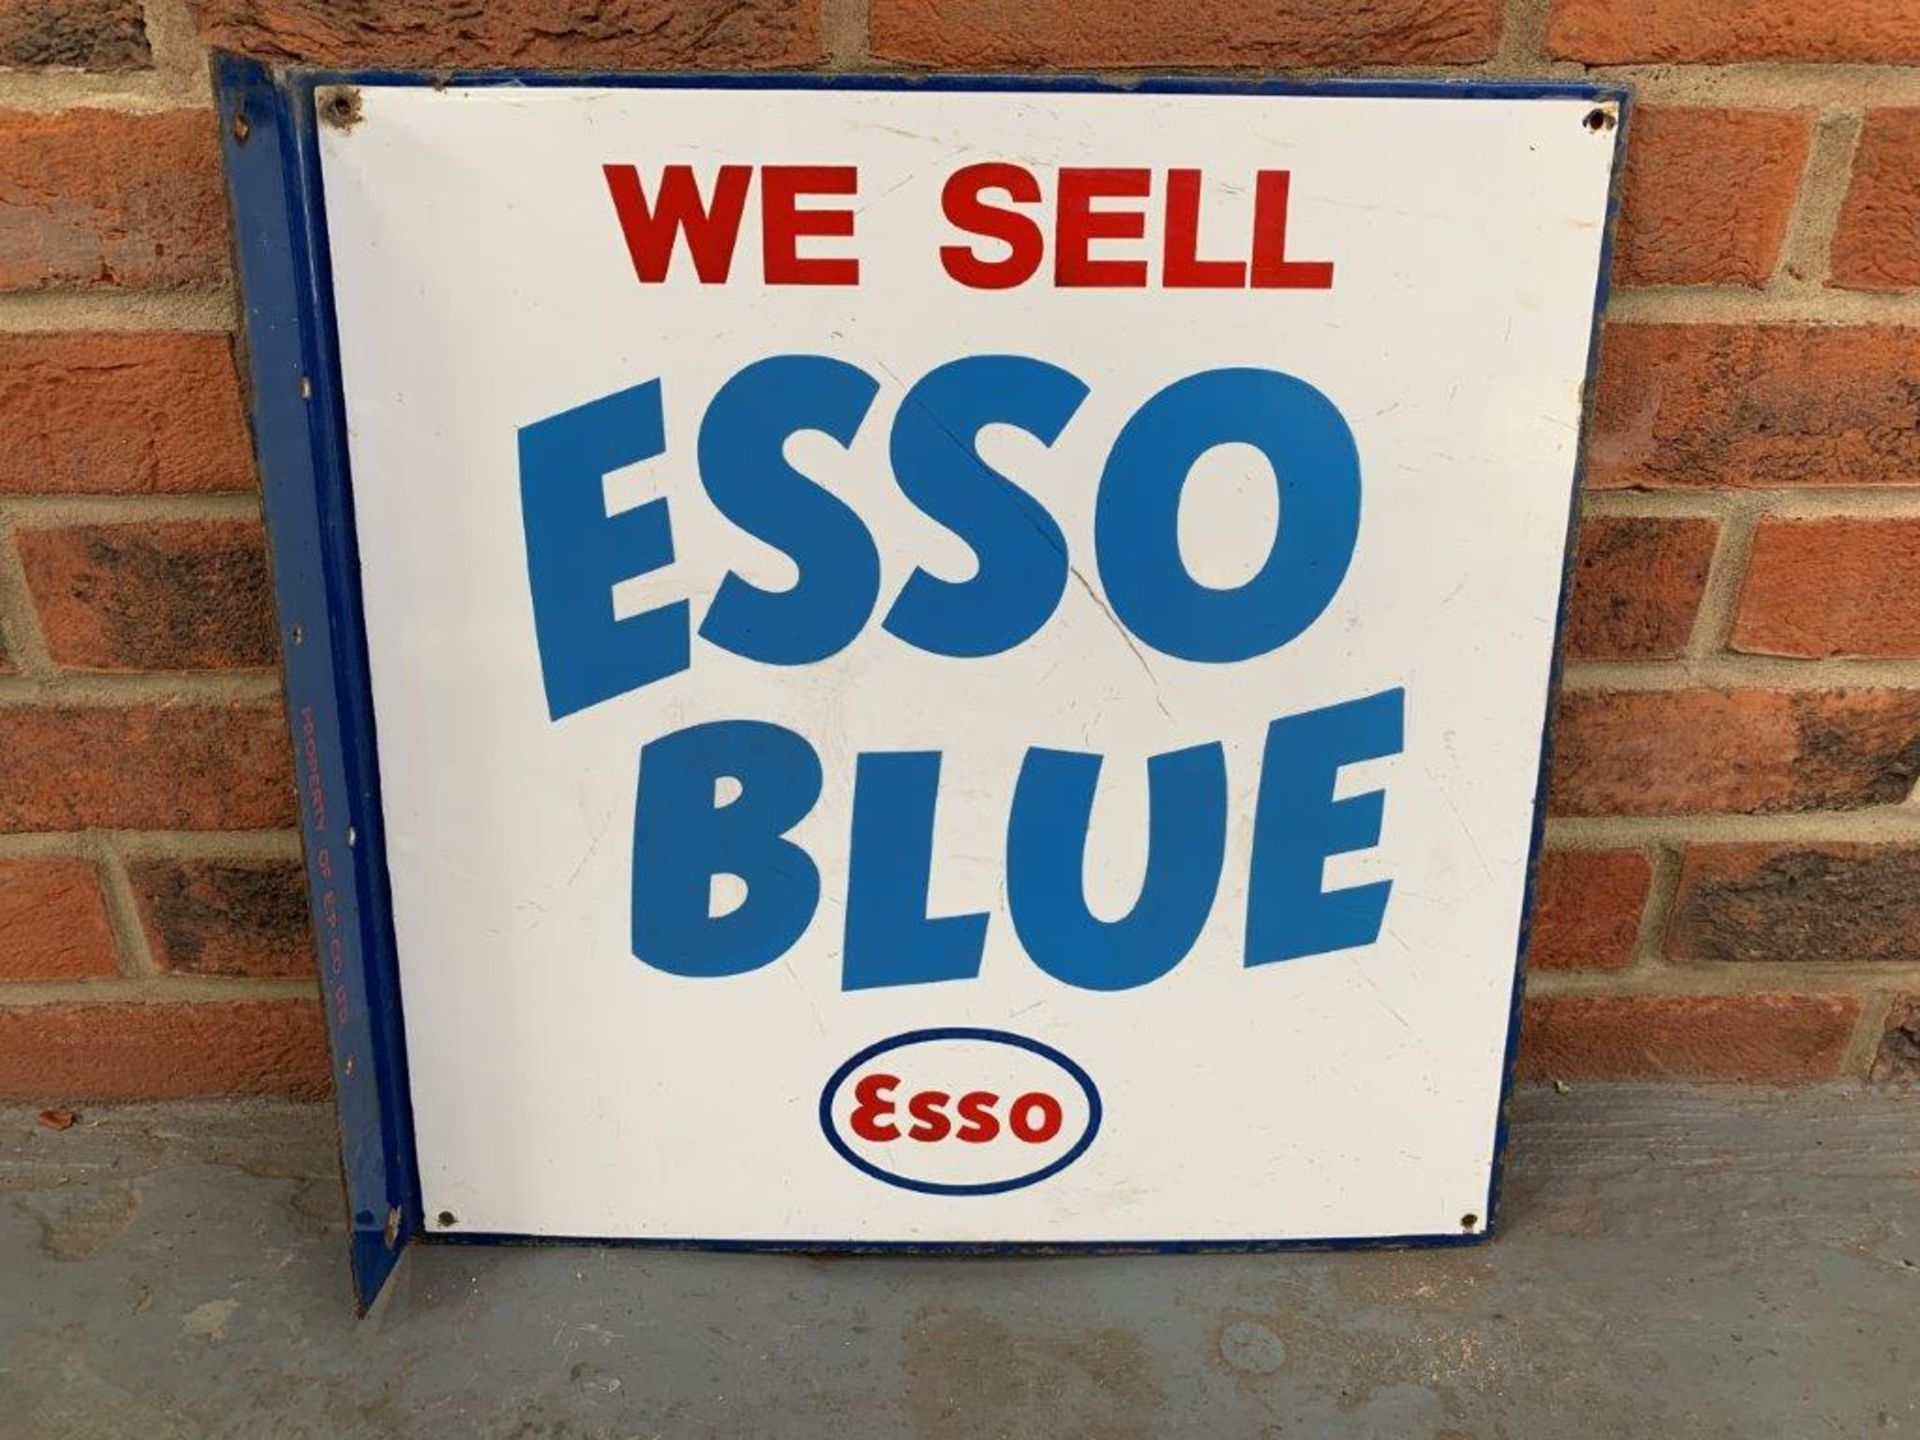 Enamel Flanged Double Sided We Sell Esso Blue" Sign" - Image 2 of 2